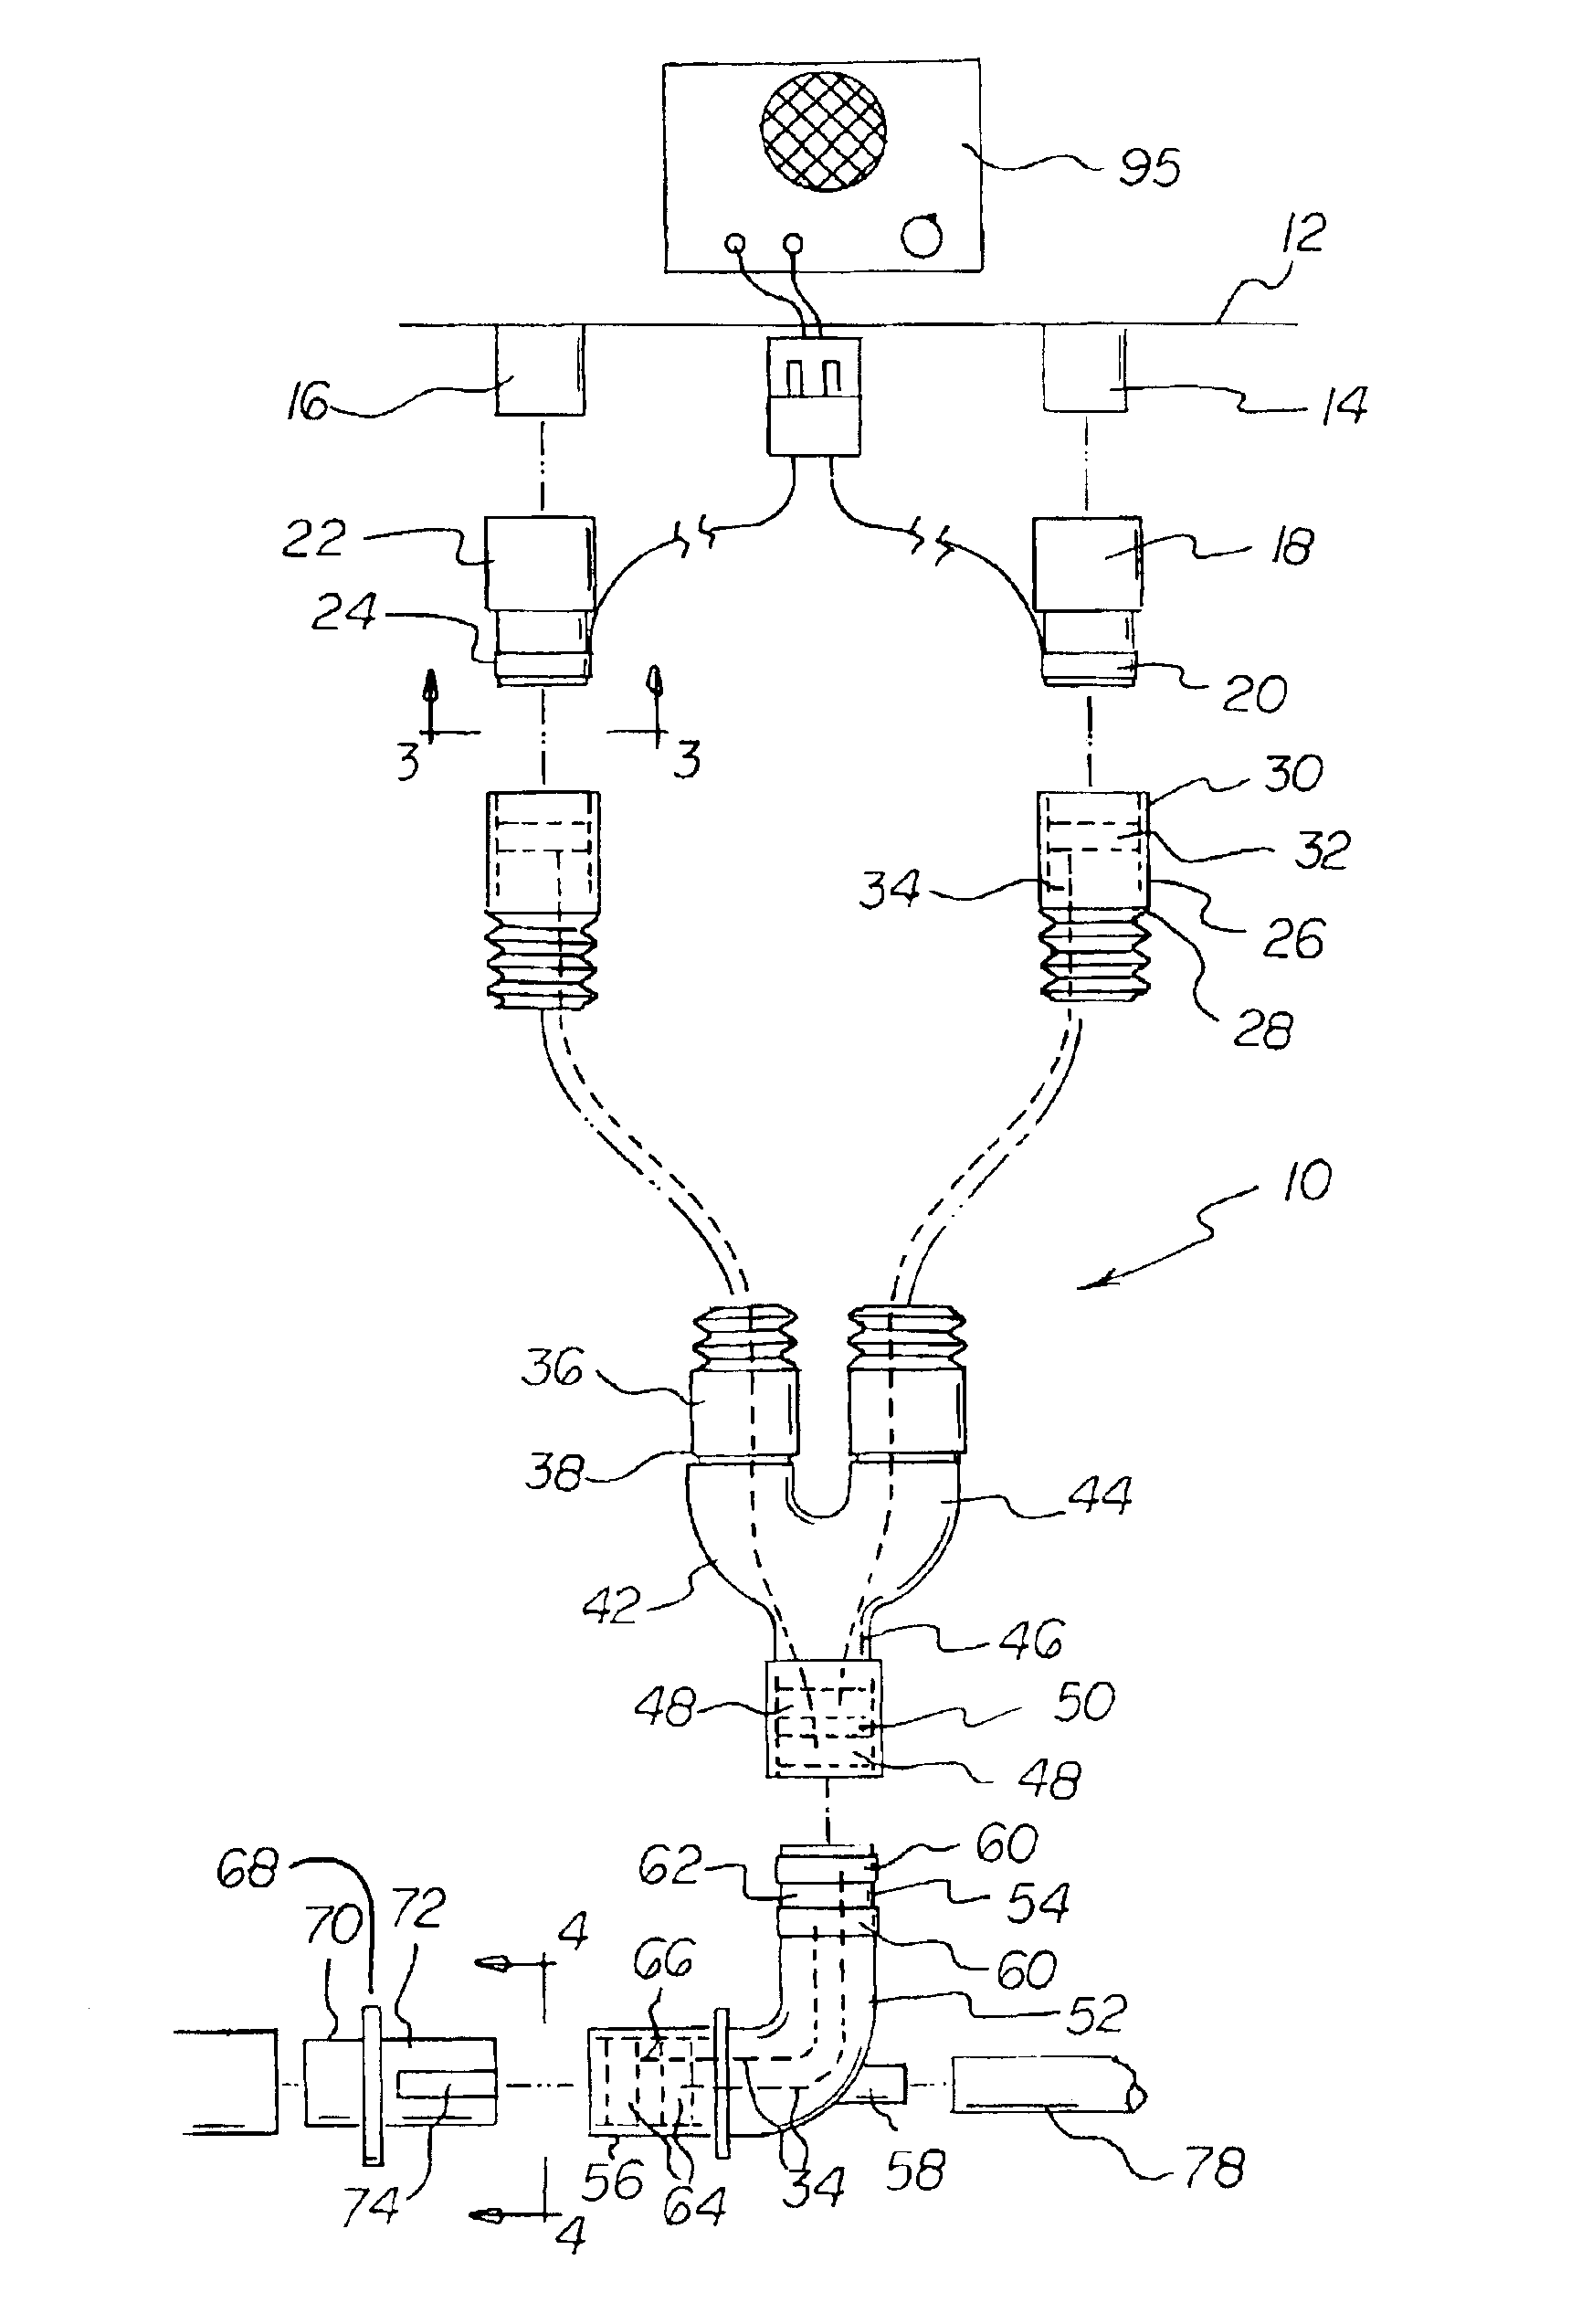 Breathing circuit disconnect warning system and method for using a disconnect system